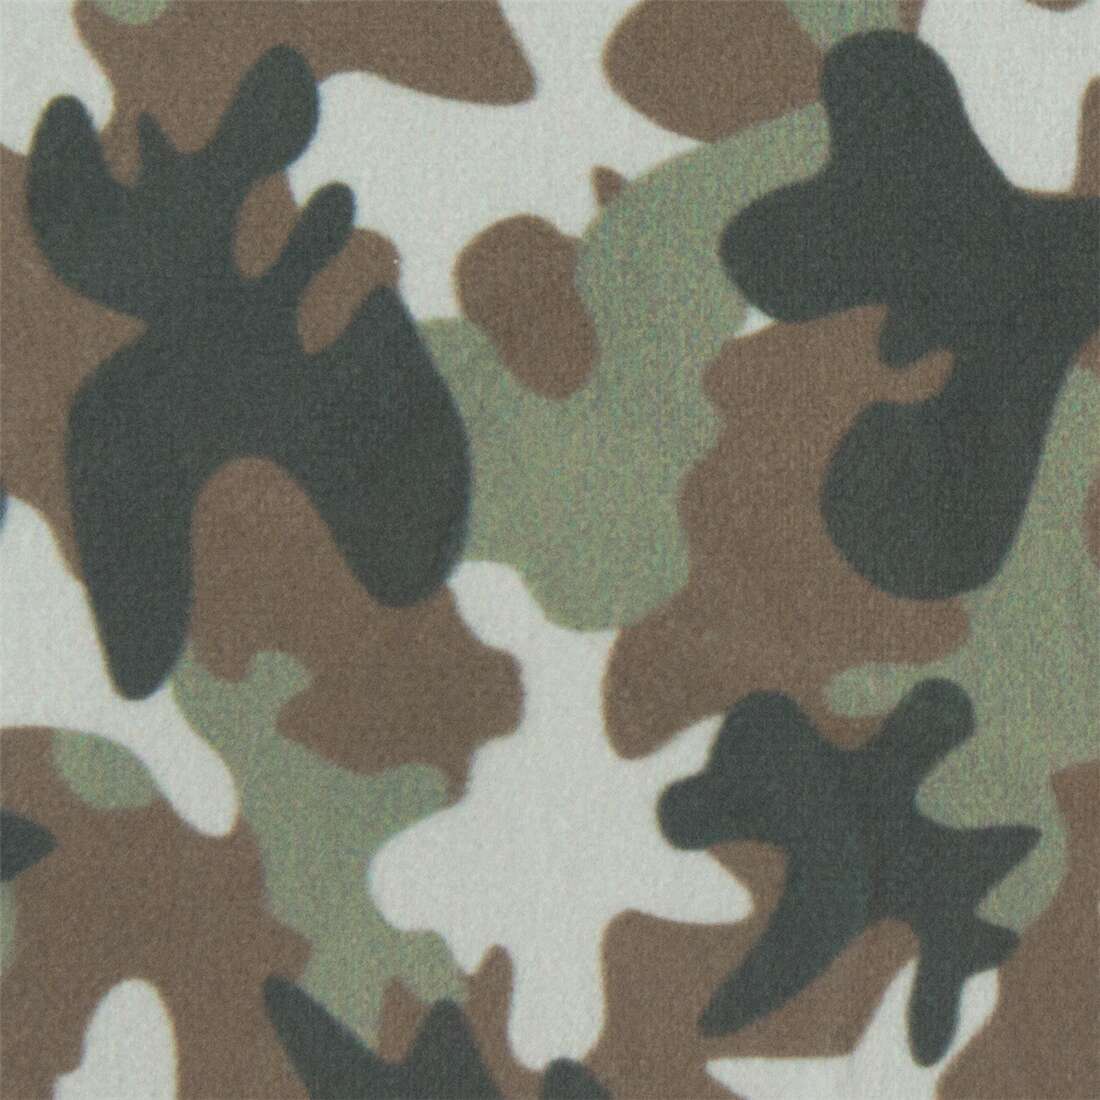 Timeless Treasures green camouflage extra wide minky fabric - modeS4u